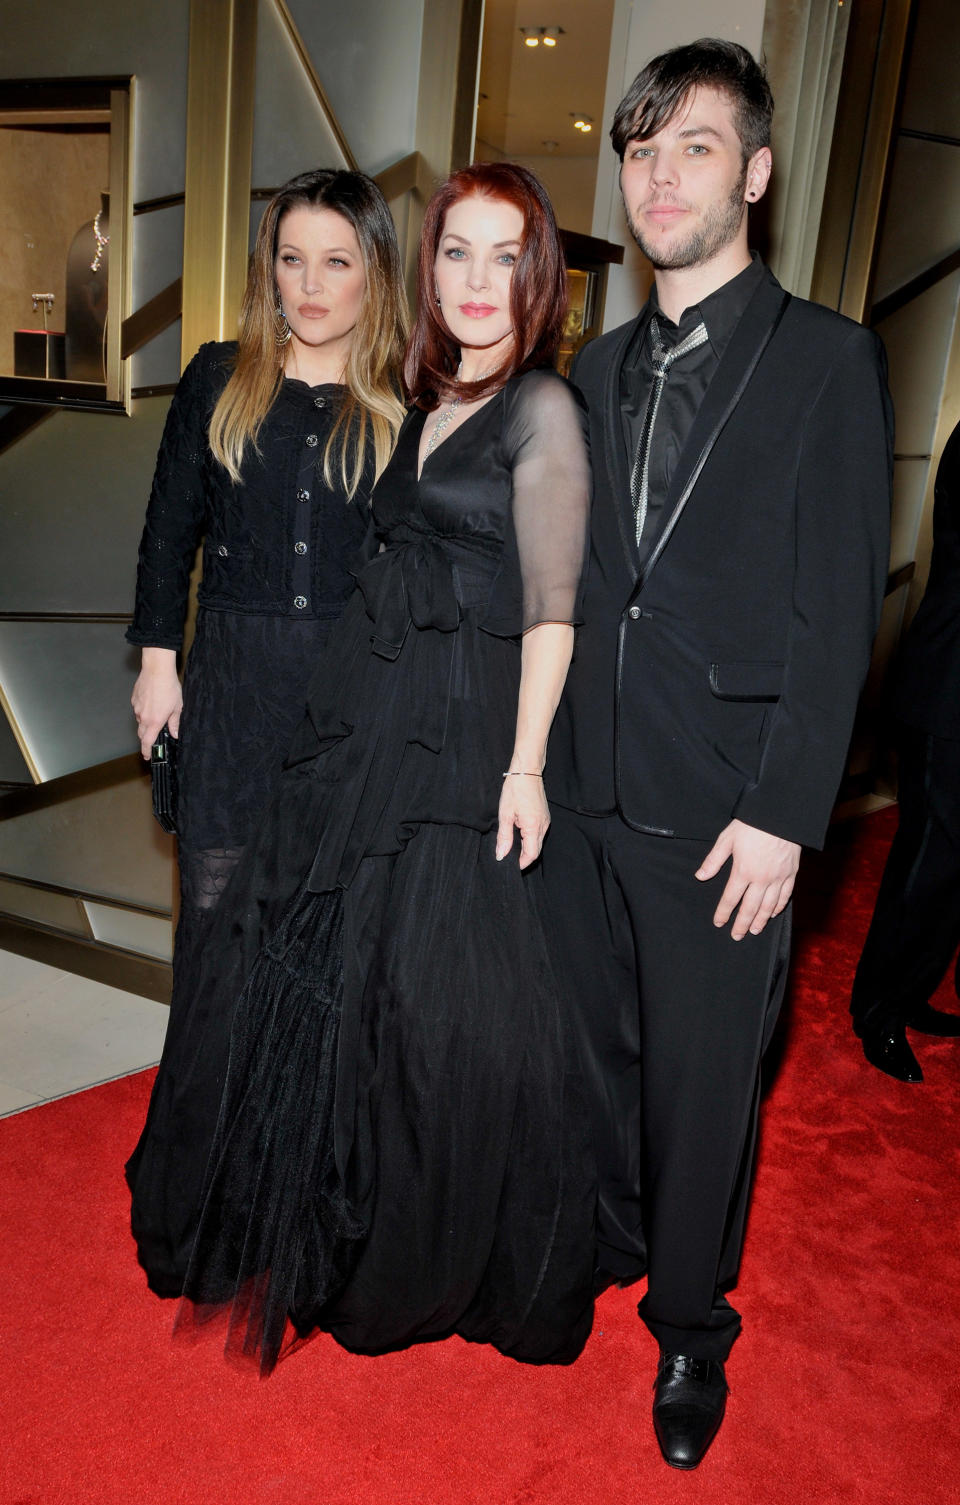 Priscilla on the red carpet with her two children